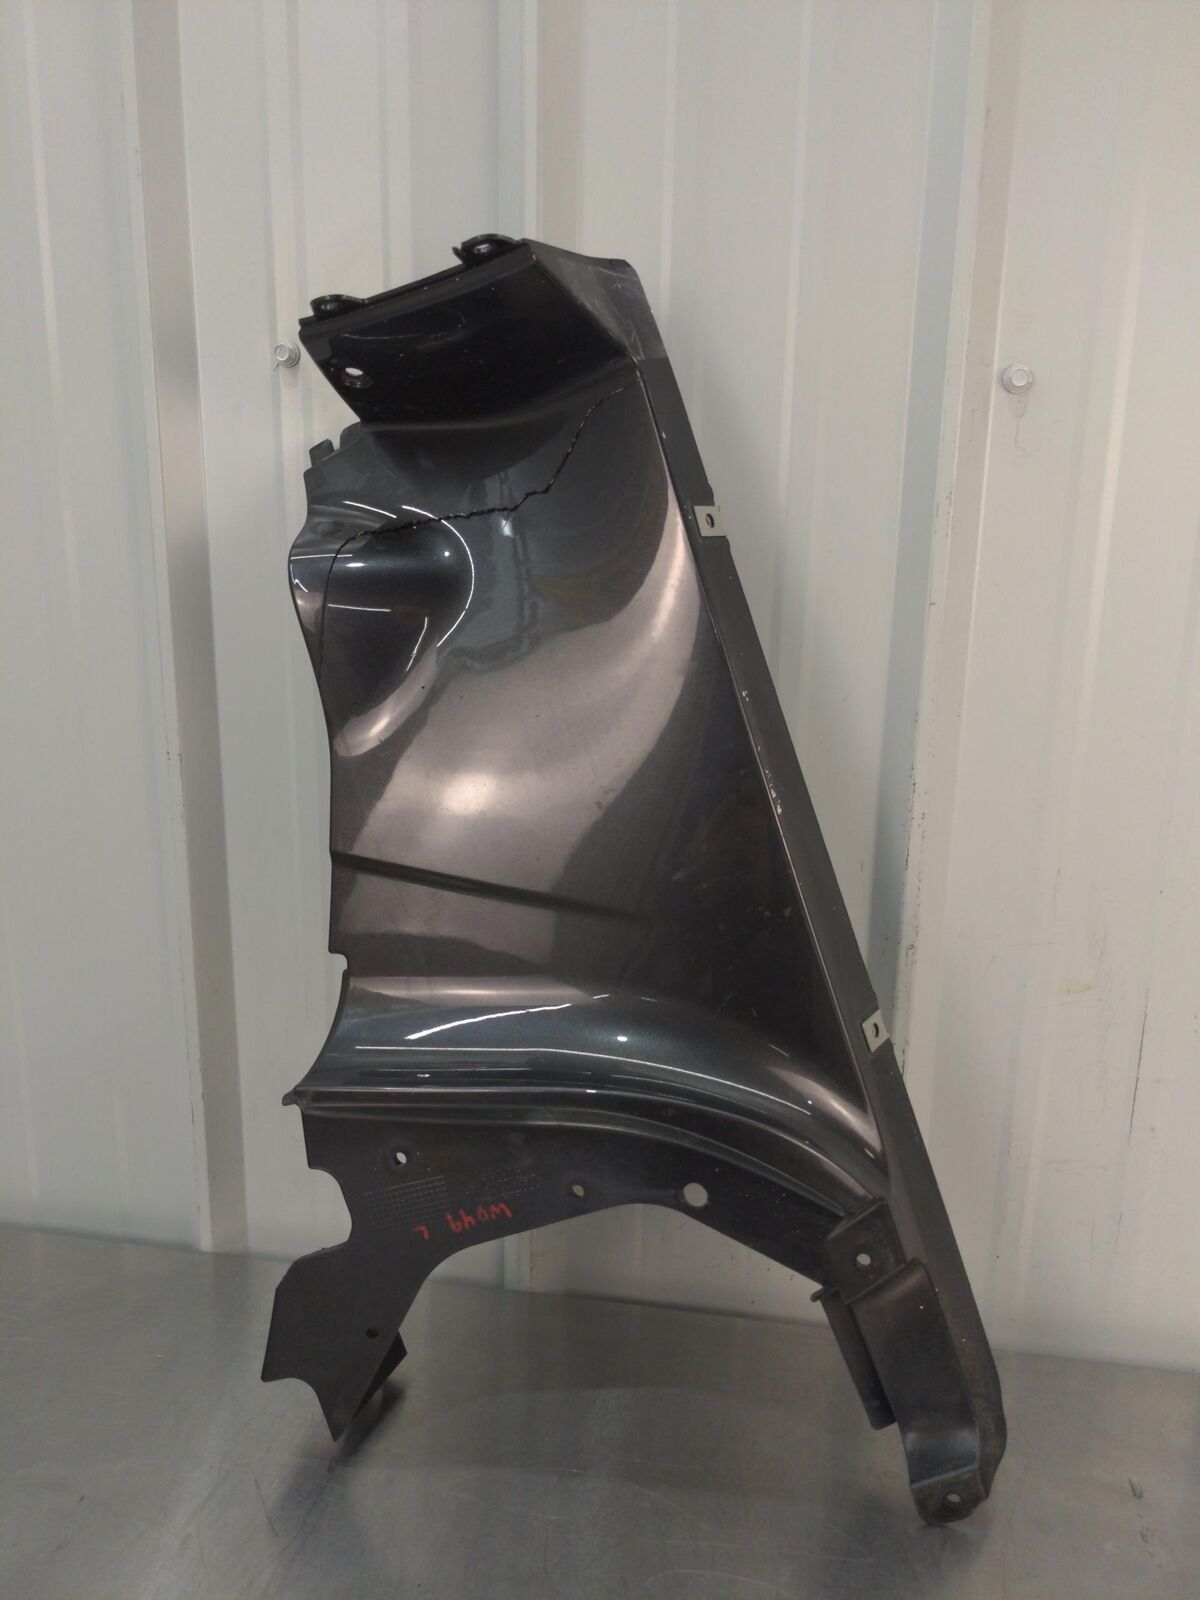 2018 MCLAREN 720S 14a0322cp Lh Air Intake Duct Panel *cracked*